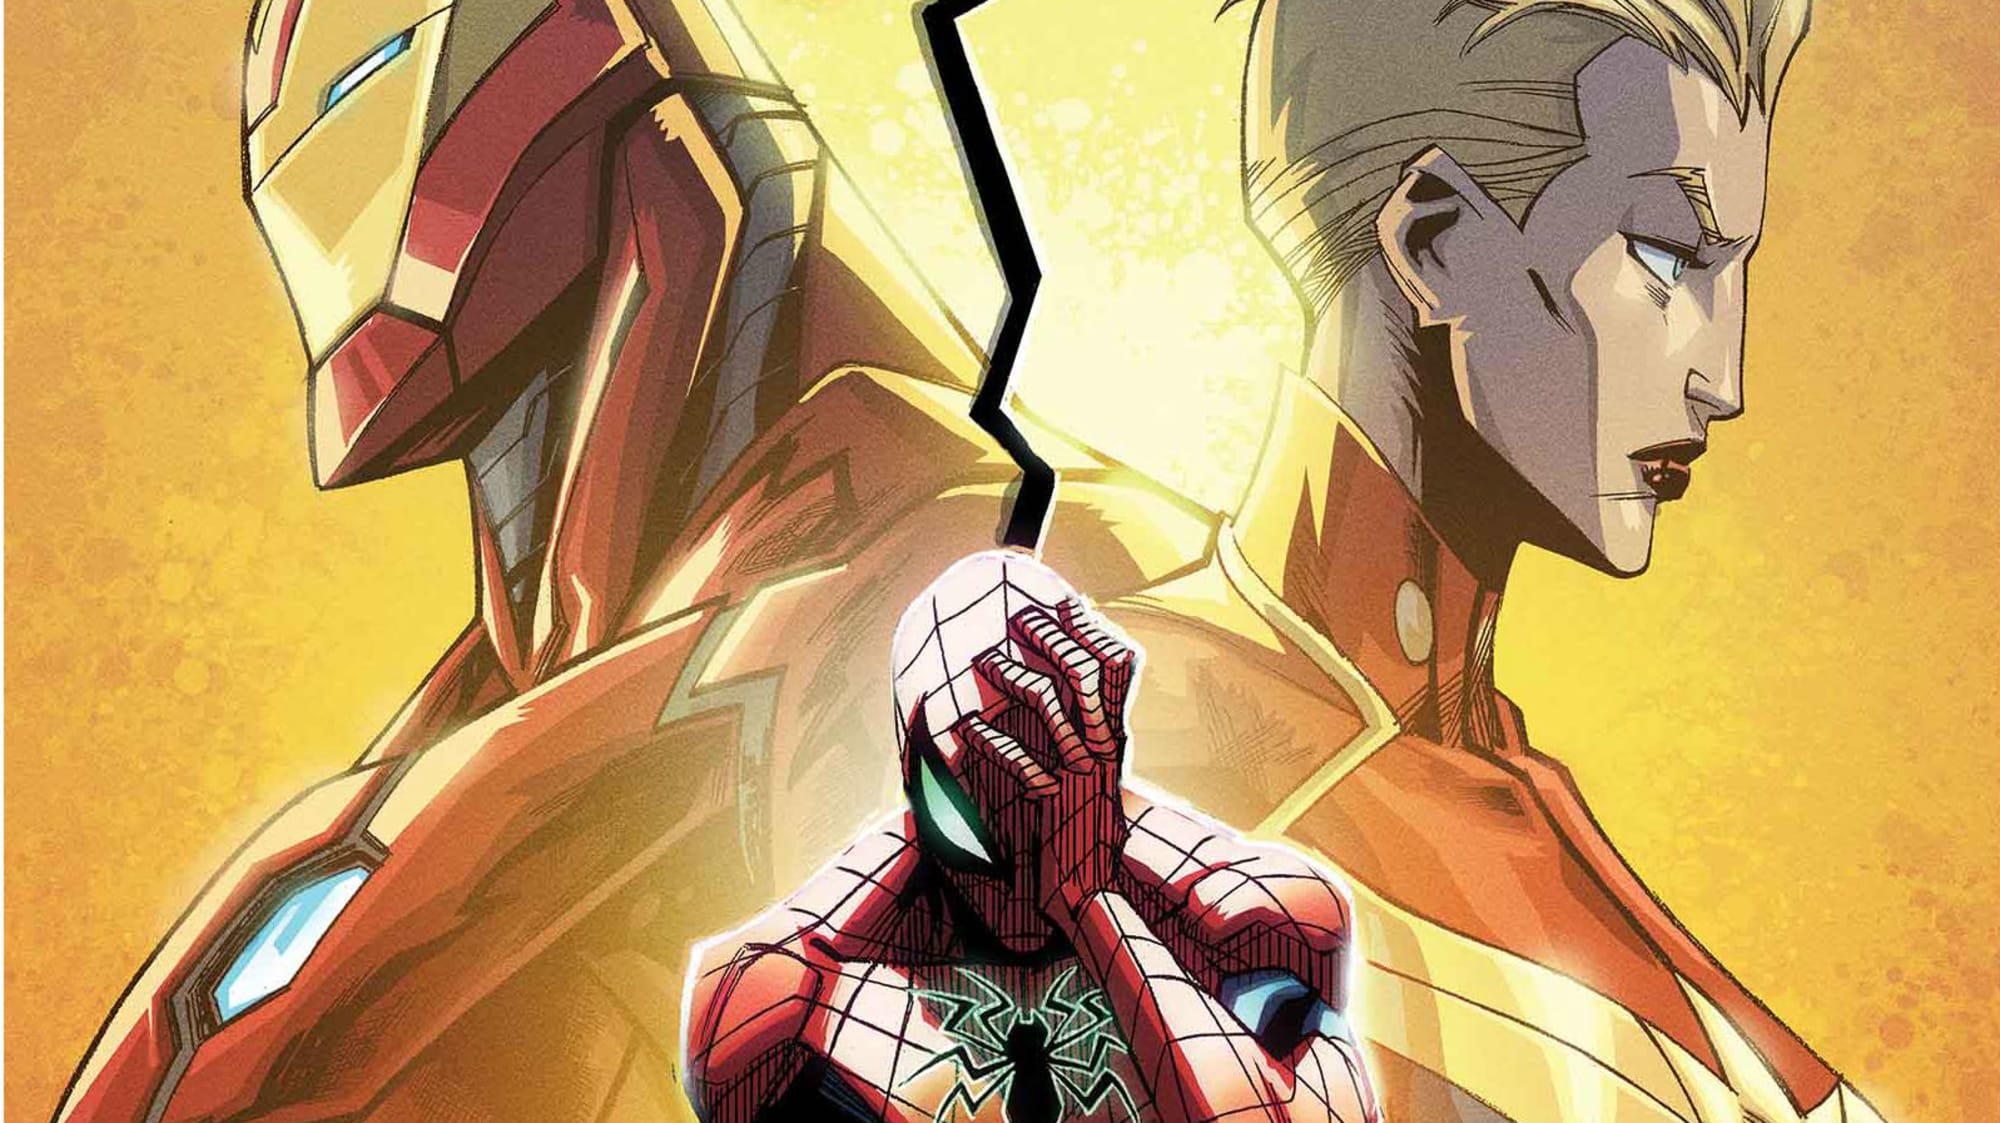 Spider-Man might be conflicted in Civil War II